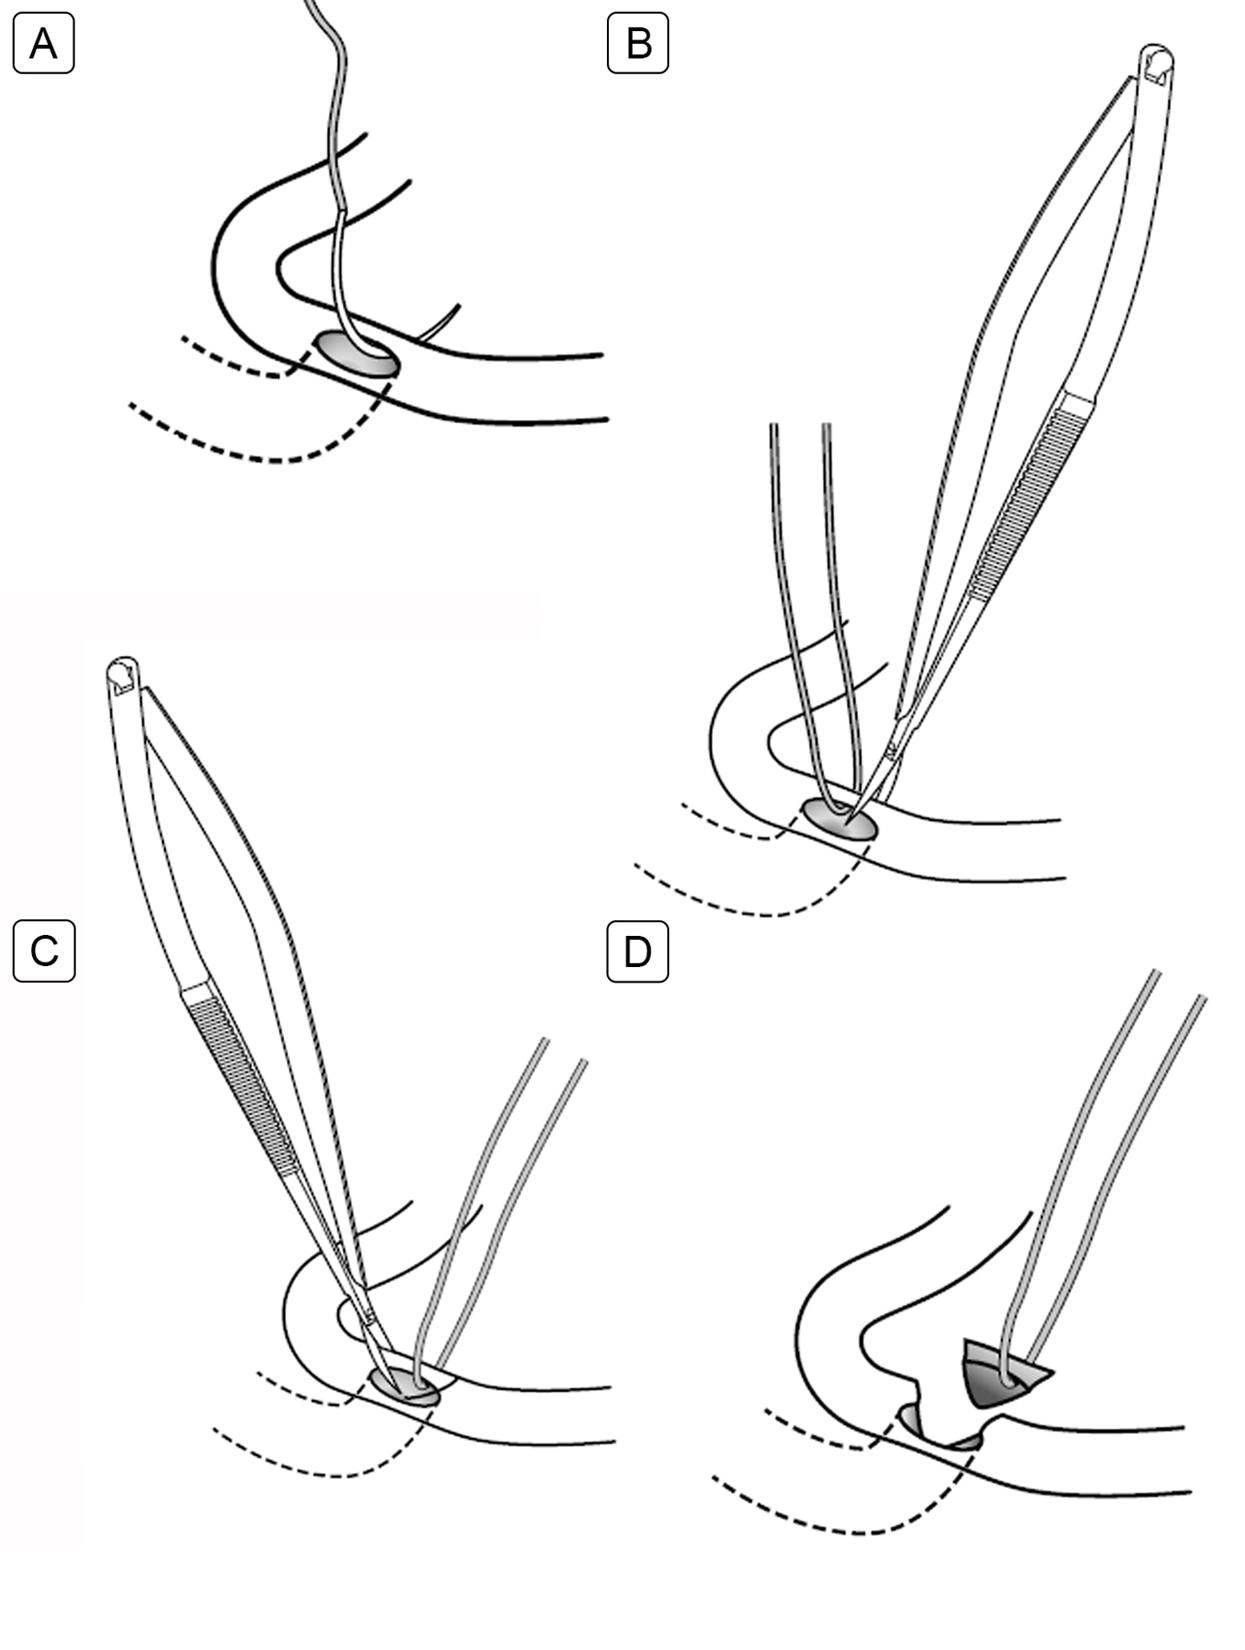 Suture-assisted punctoplasty